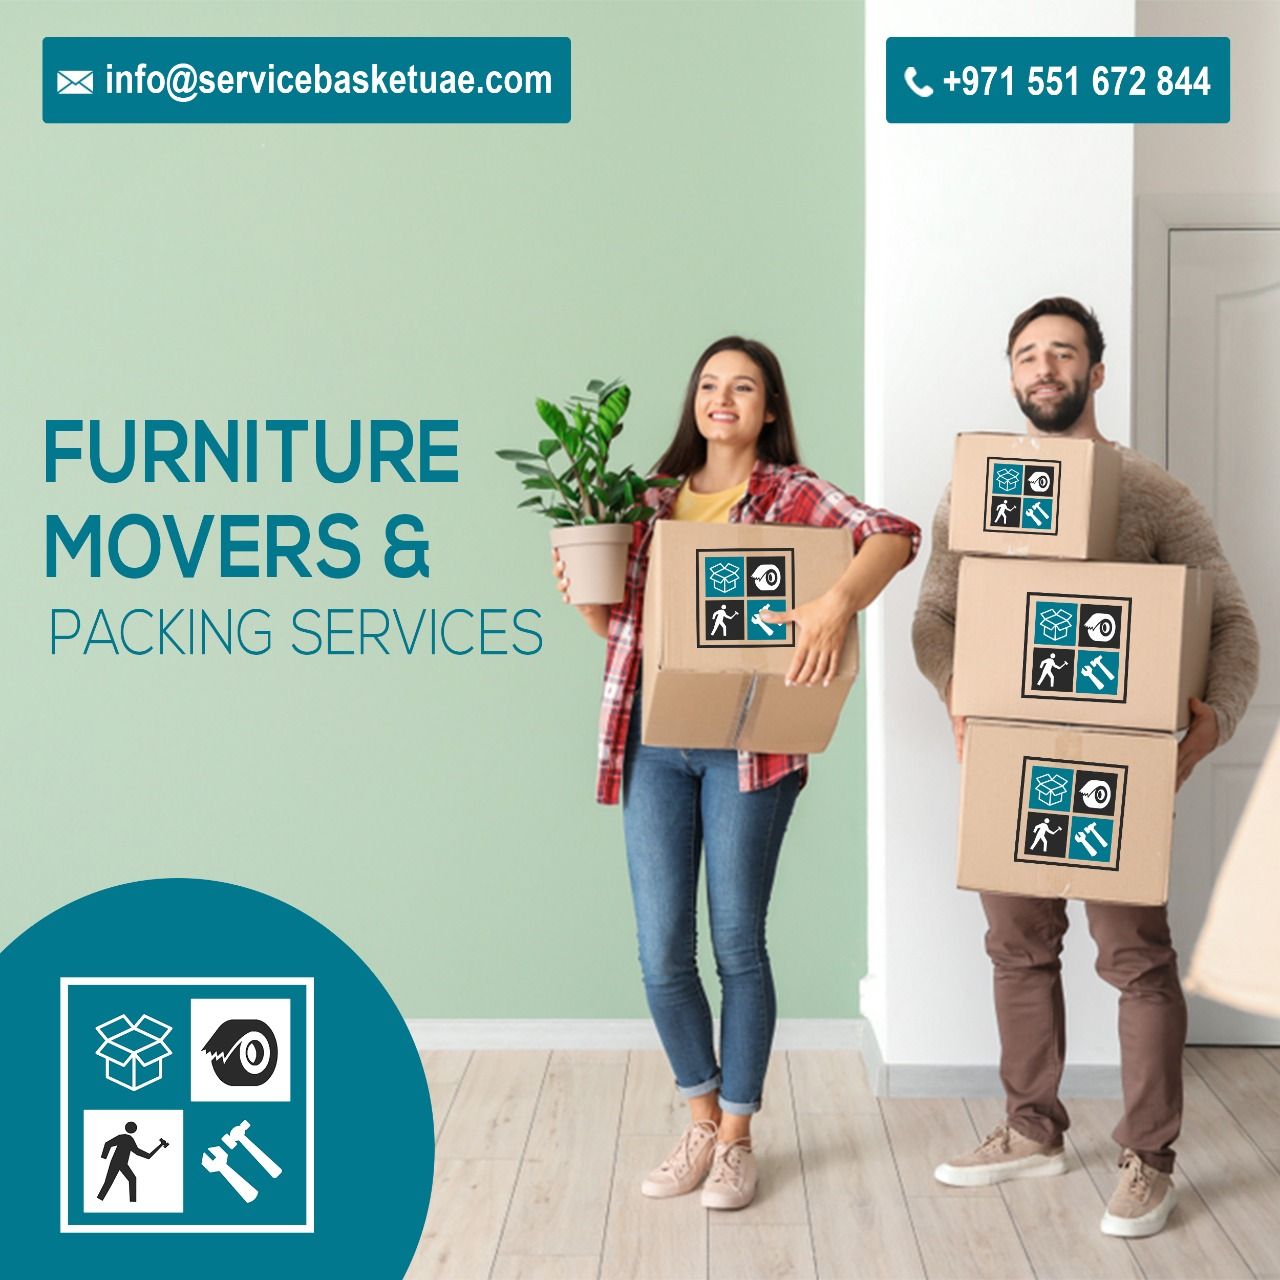 Service Basket UAE Movers and Packers Dubai